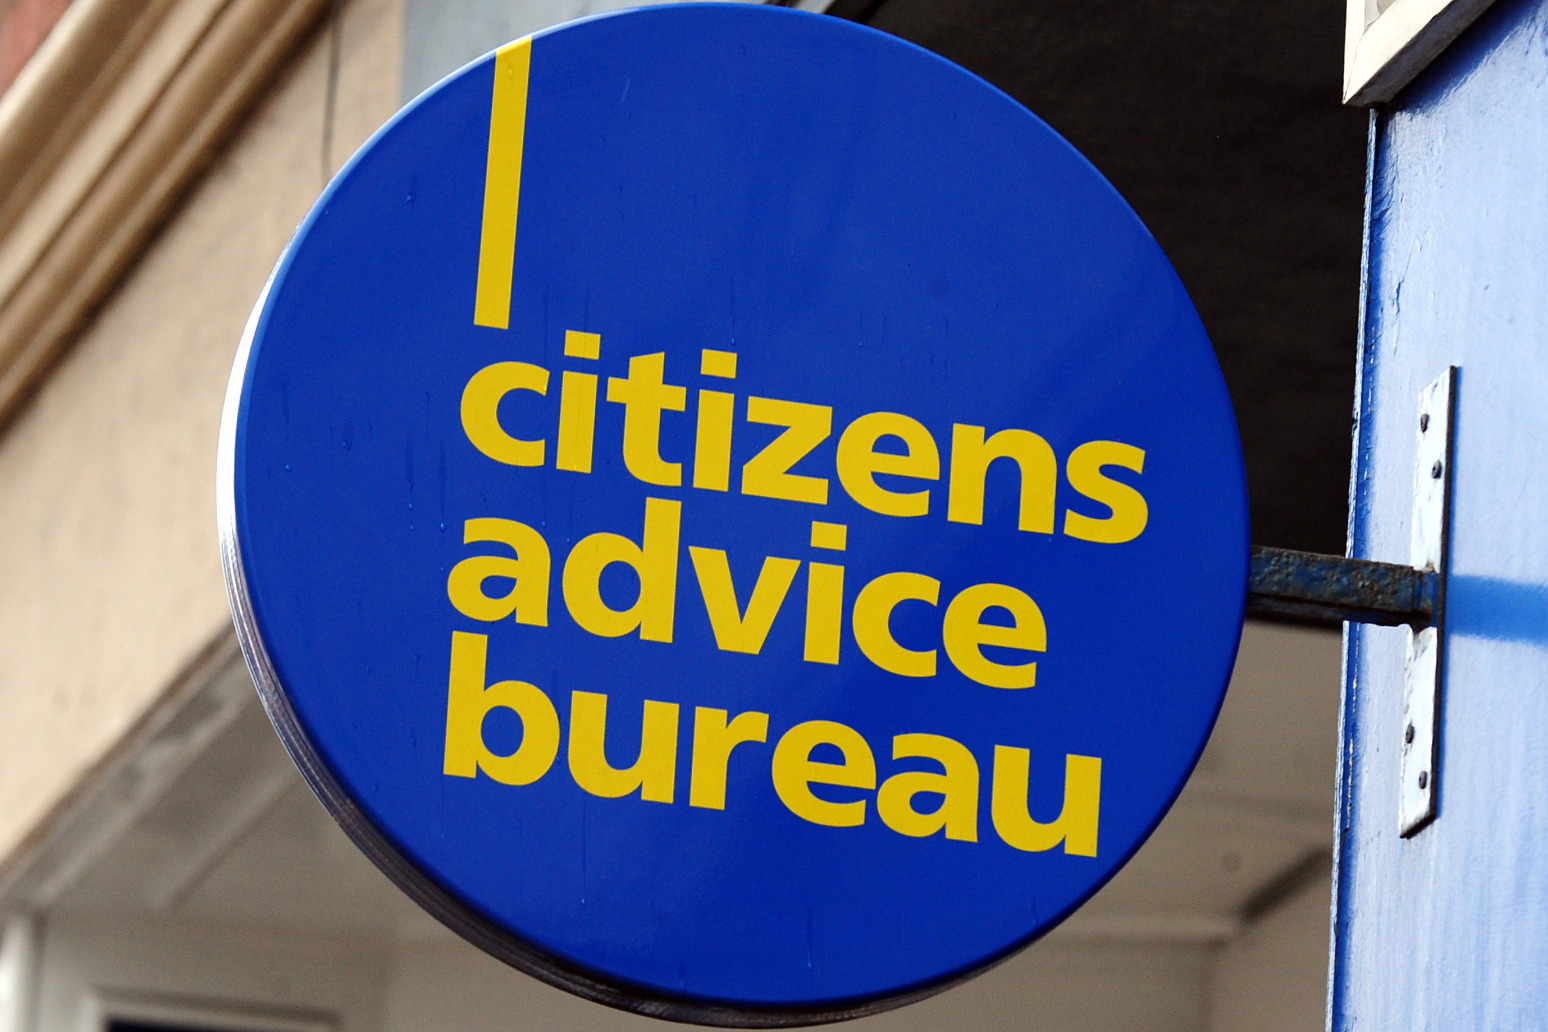 Single-parent families make up one in four Citizens Advice debt assessments 